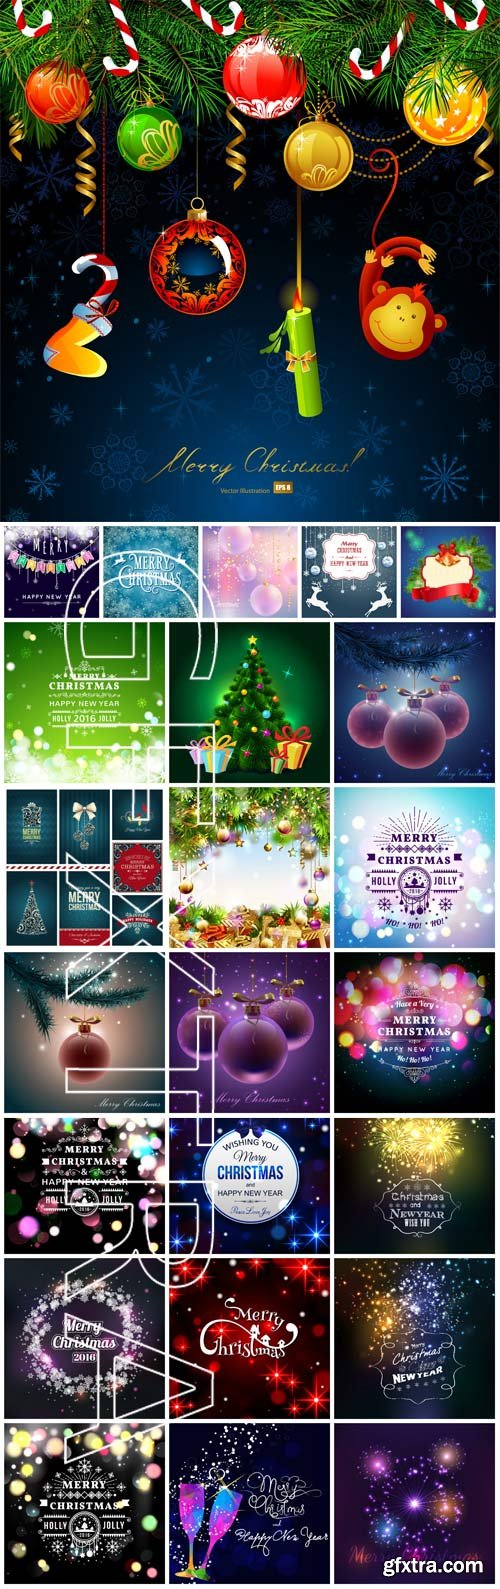 Merry Christmas, New Year vector, backgrounds, Santa Claus, Christmas tree, winter